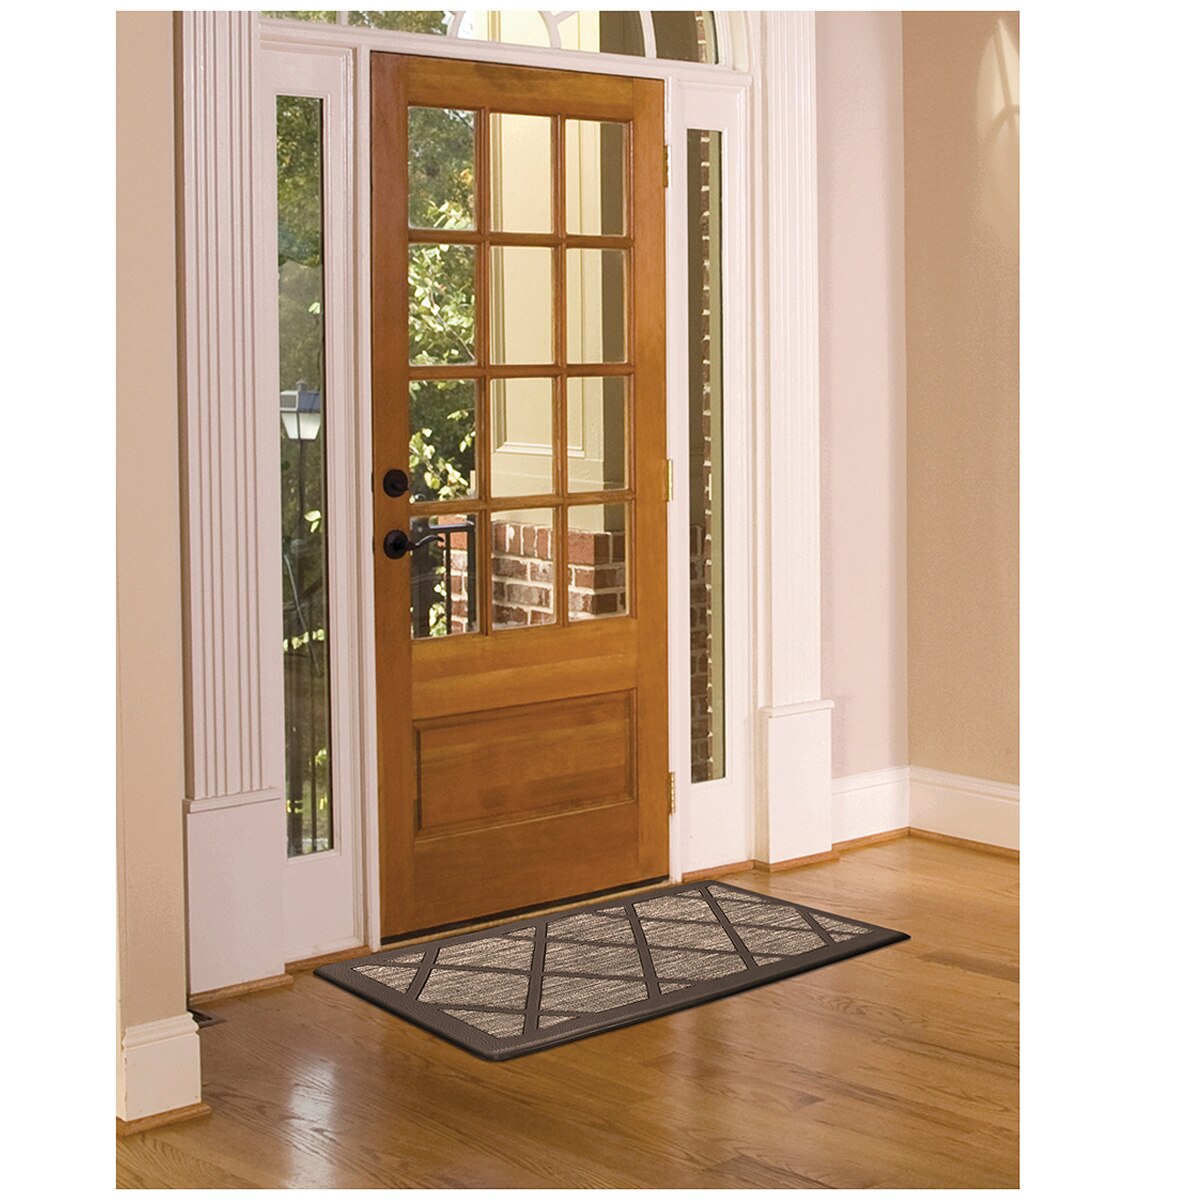 Town & Country Passages Kitchen Mat - Brown